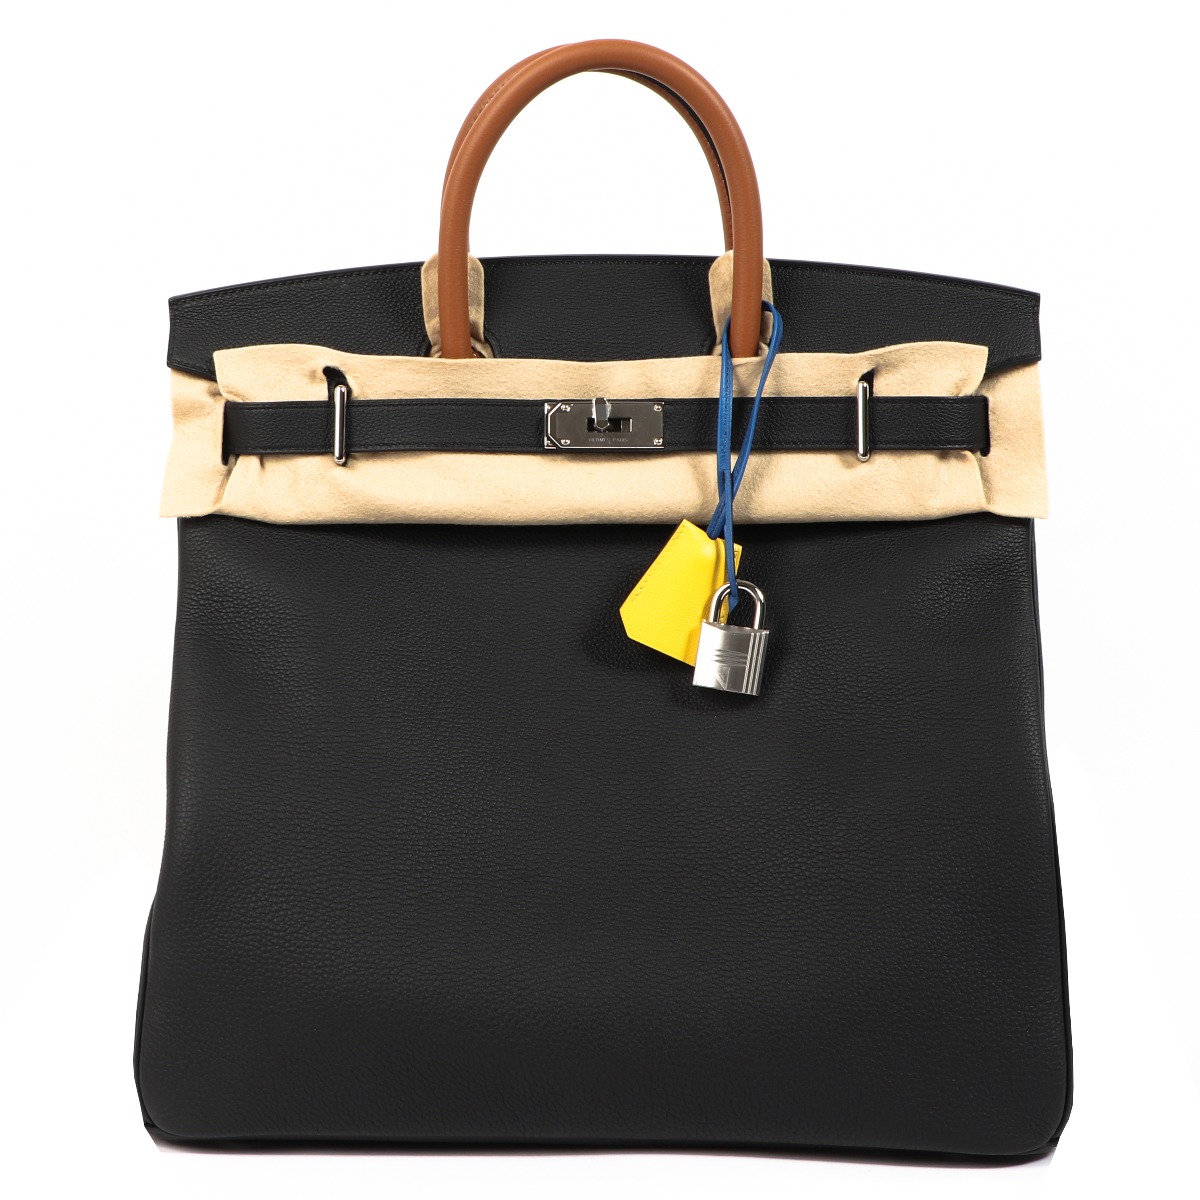 Hermes Haut a Courroies HAC 40 Flag Limited Edition Birkin Bag in